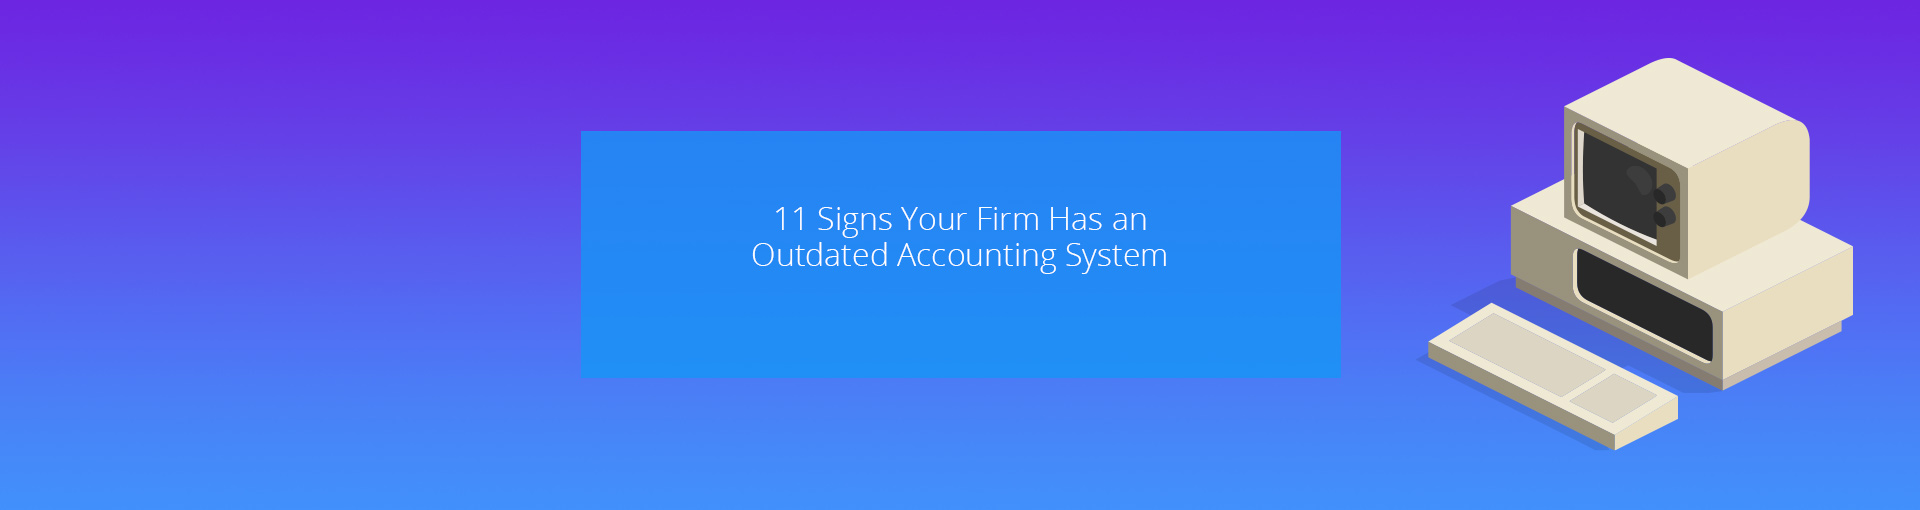 11 Signs Your Firm Has an Outdated Accounting System